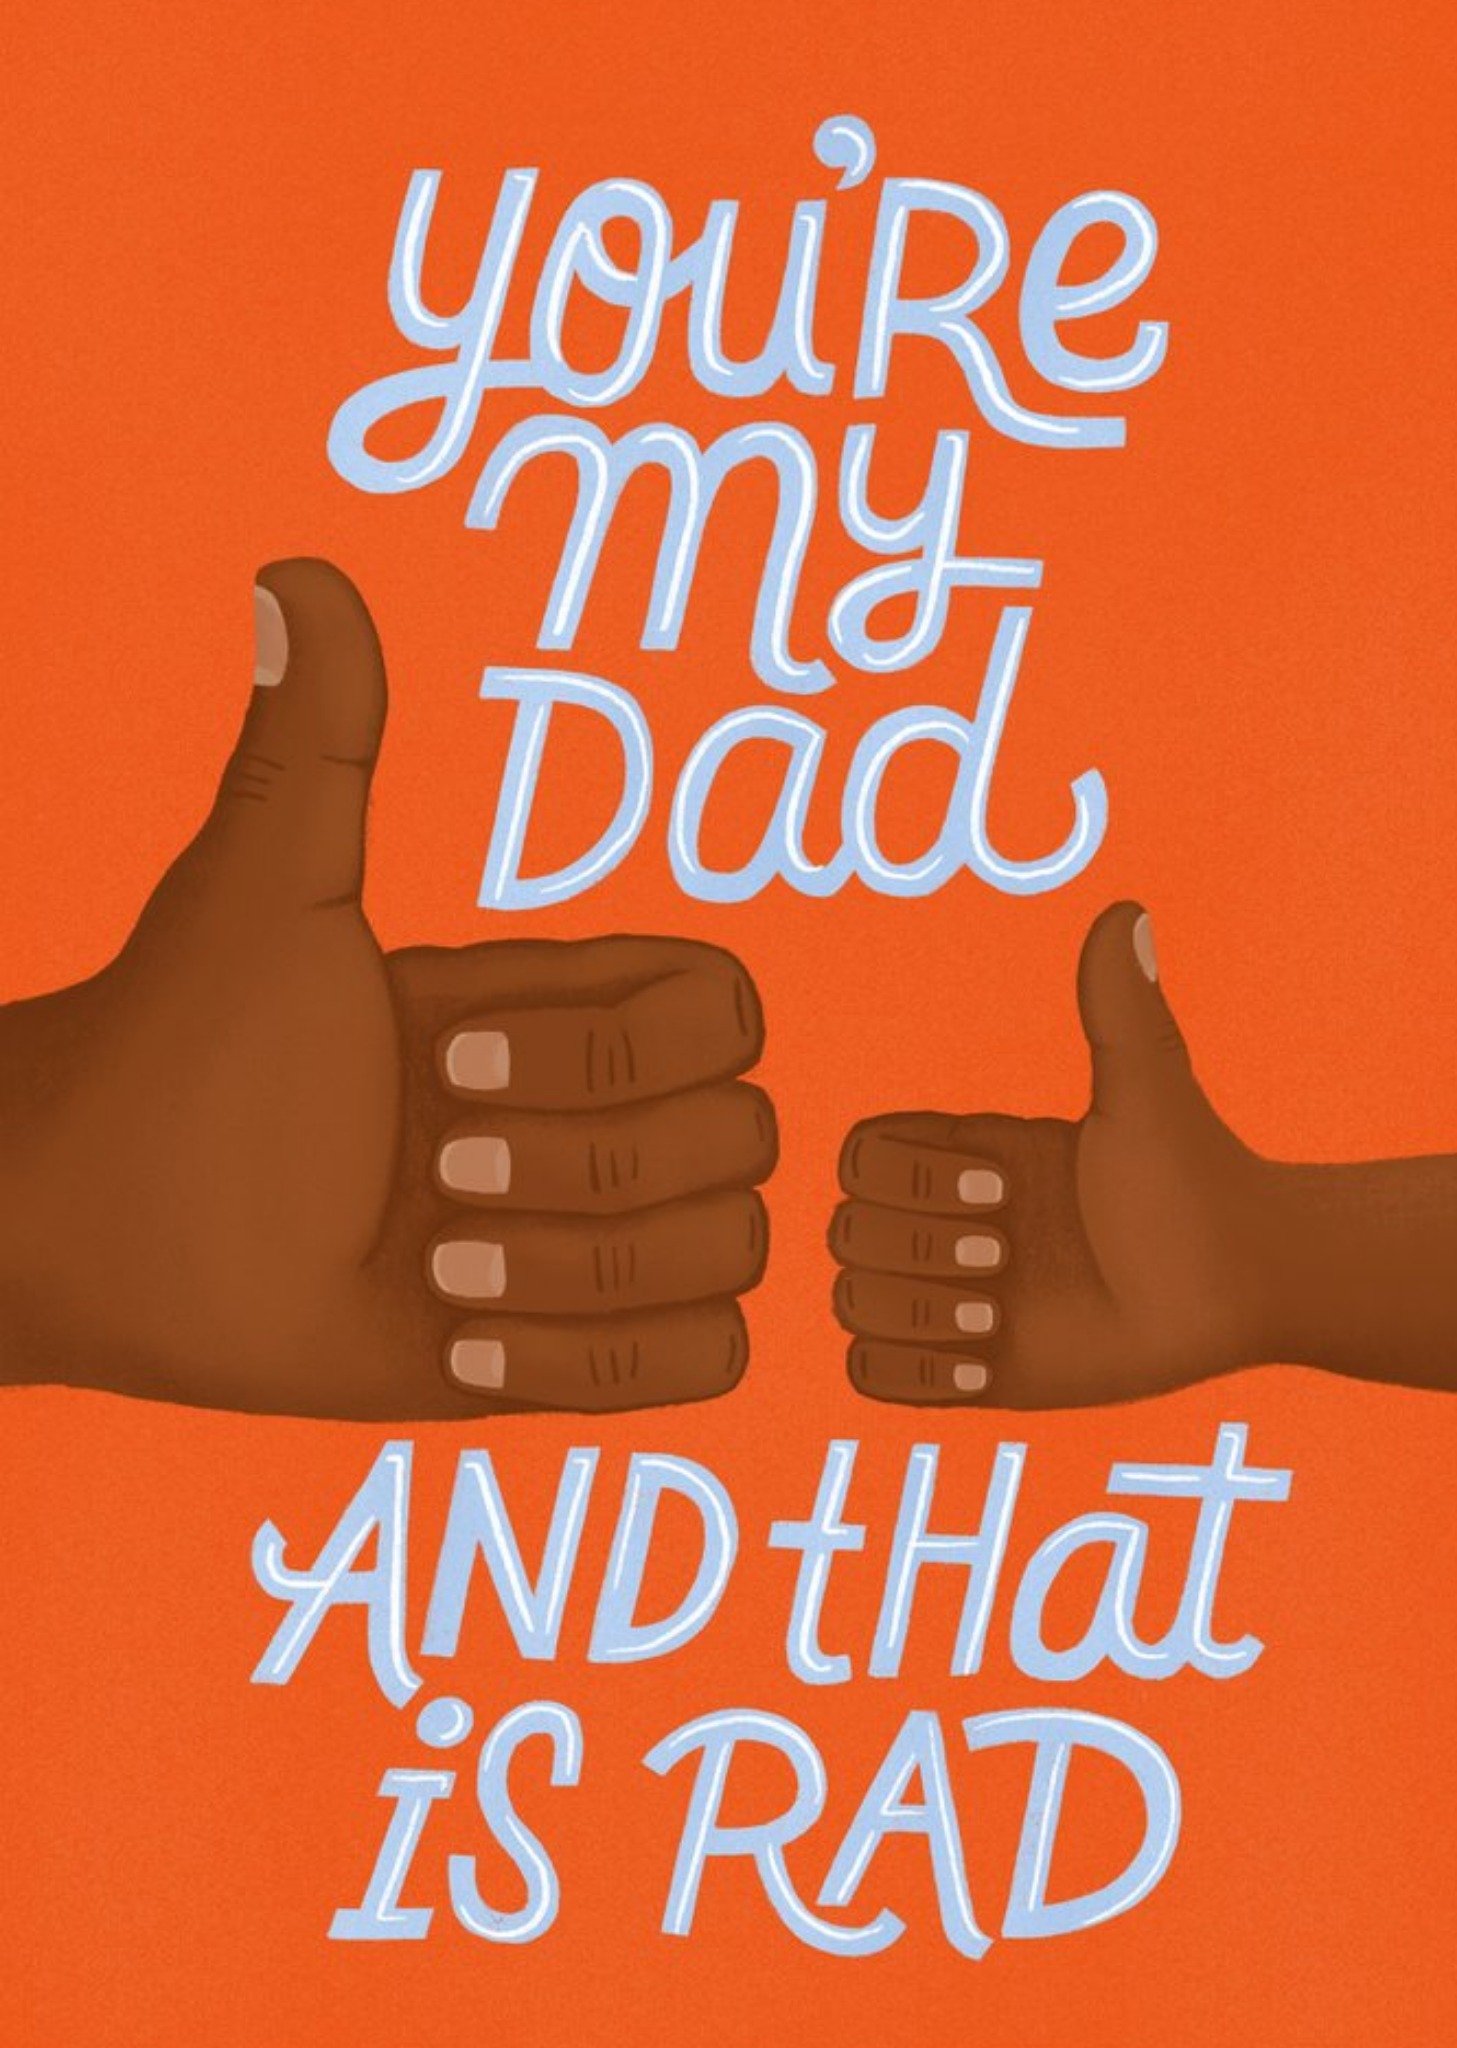 Cardy Club Typographic Cute Cartoon Youre My Dad And That Is Rad Fathers Day Card Ecard